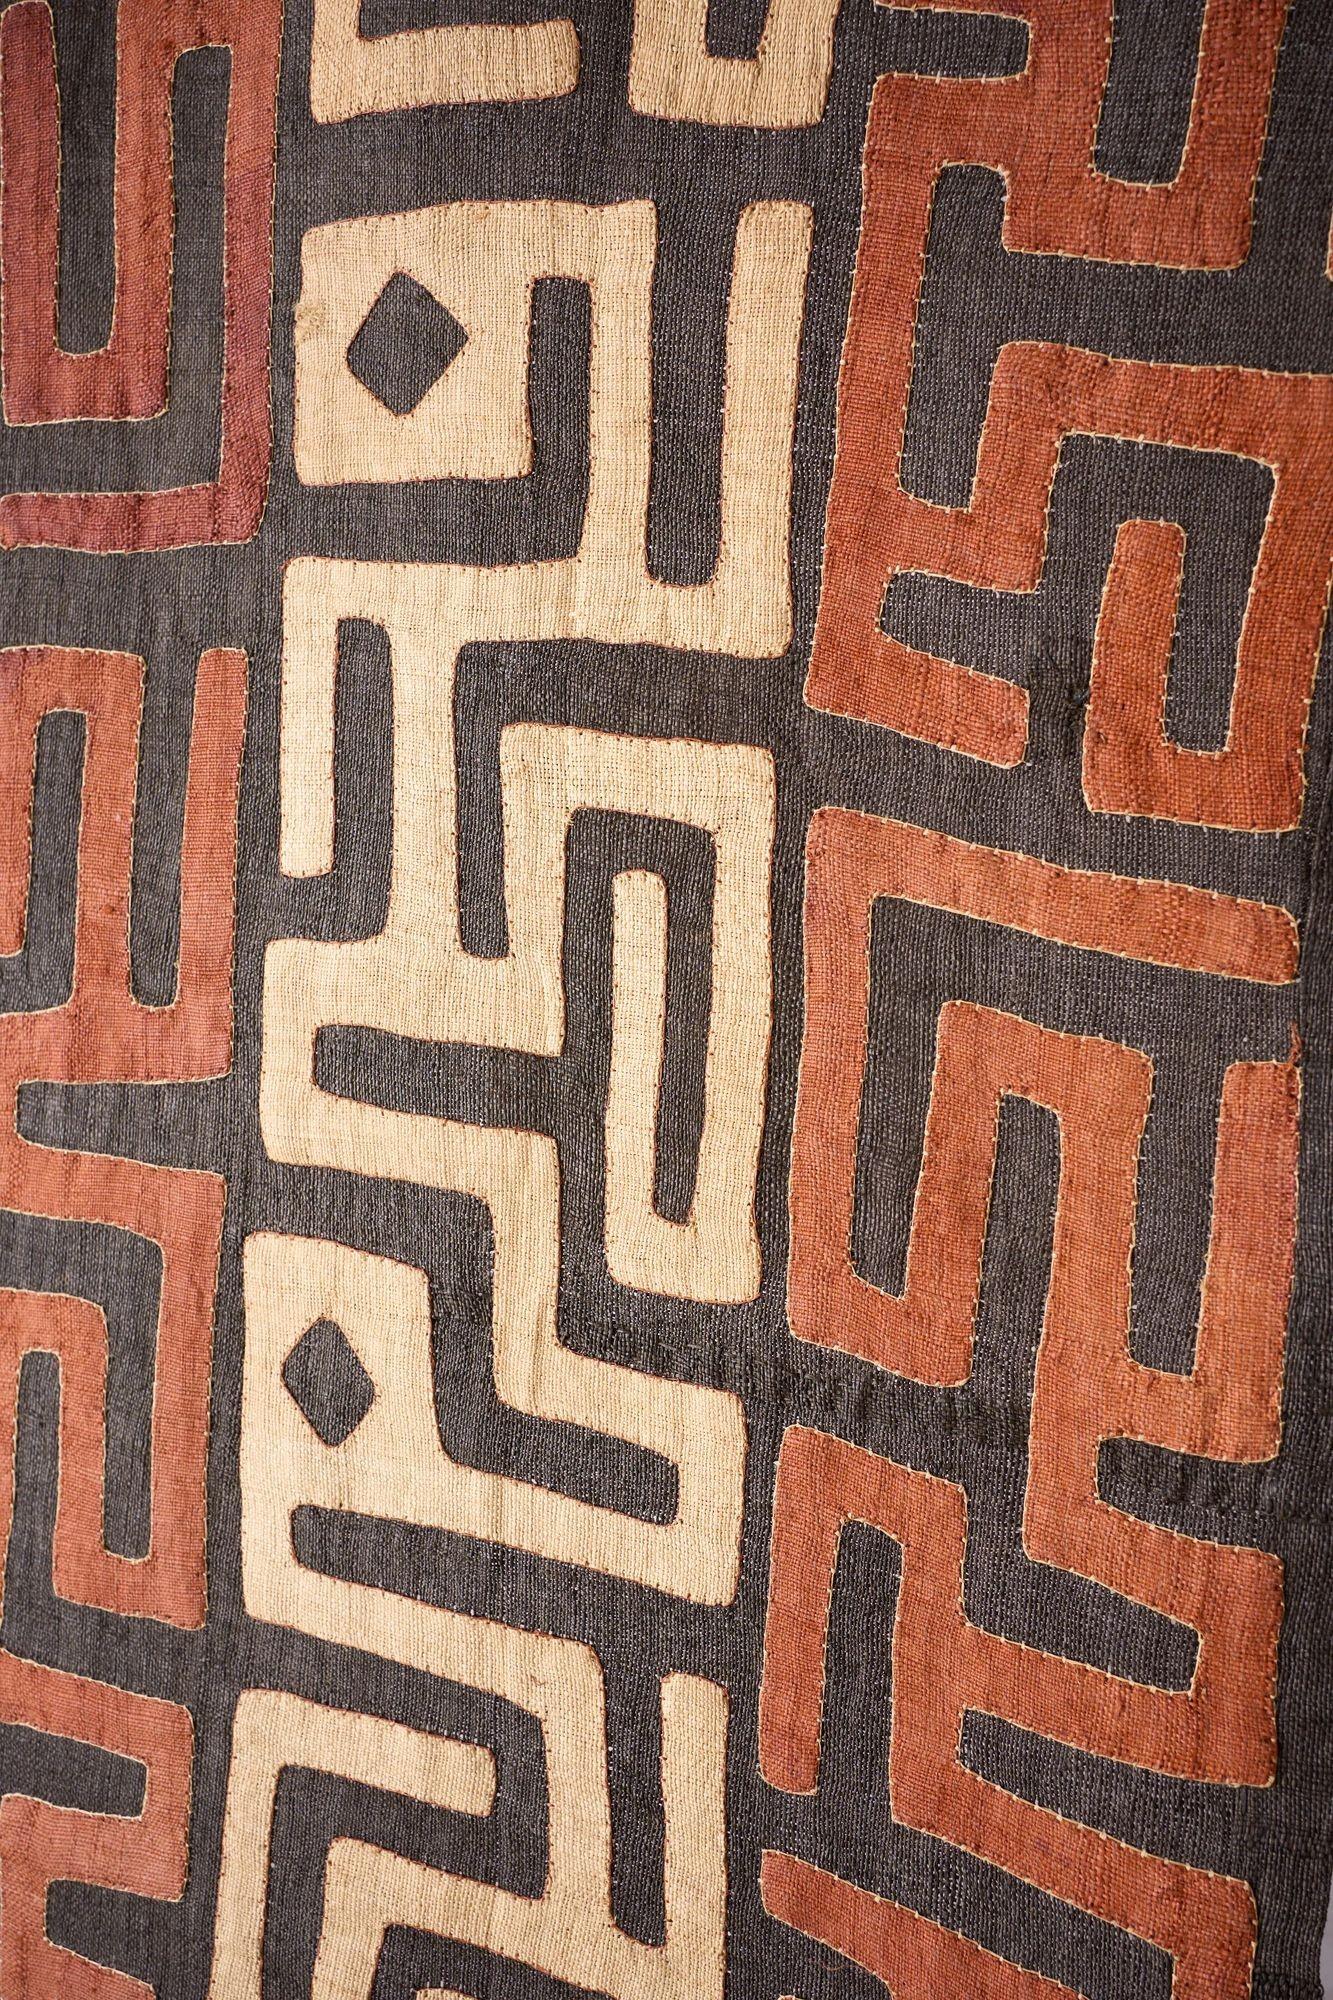 This is a hugely decorative and very long 20th century African Kuba cloth from the Congo. Made entirely by hand with applied abstract shapes to create this striking designed piece. Ideal as wall decoration are turned into cushions. No holes or